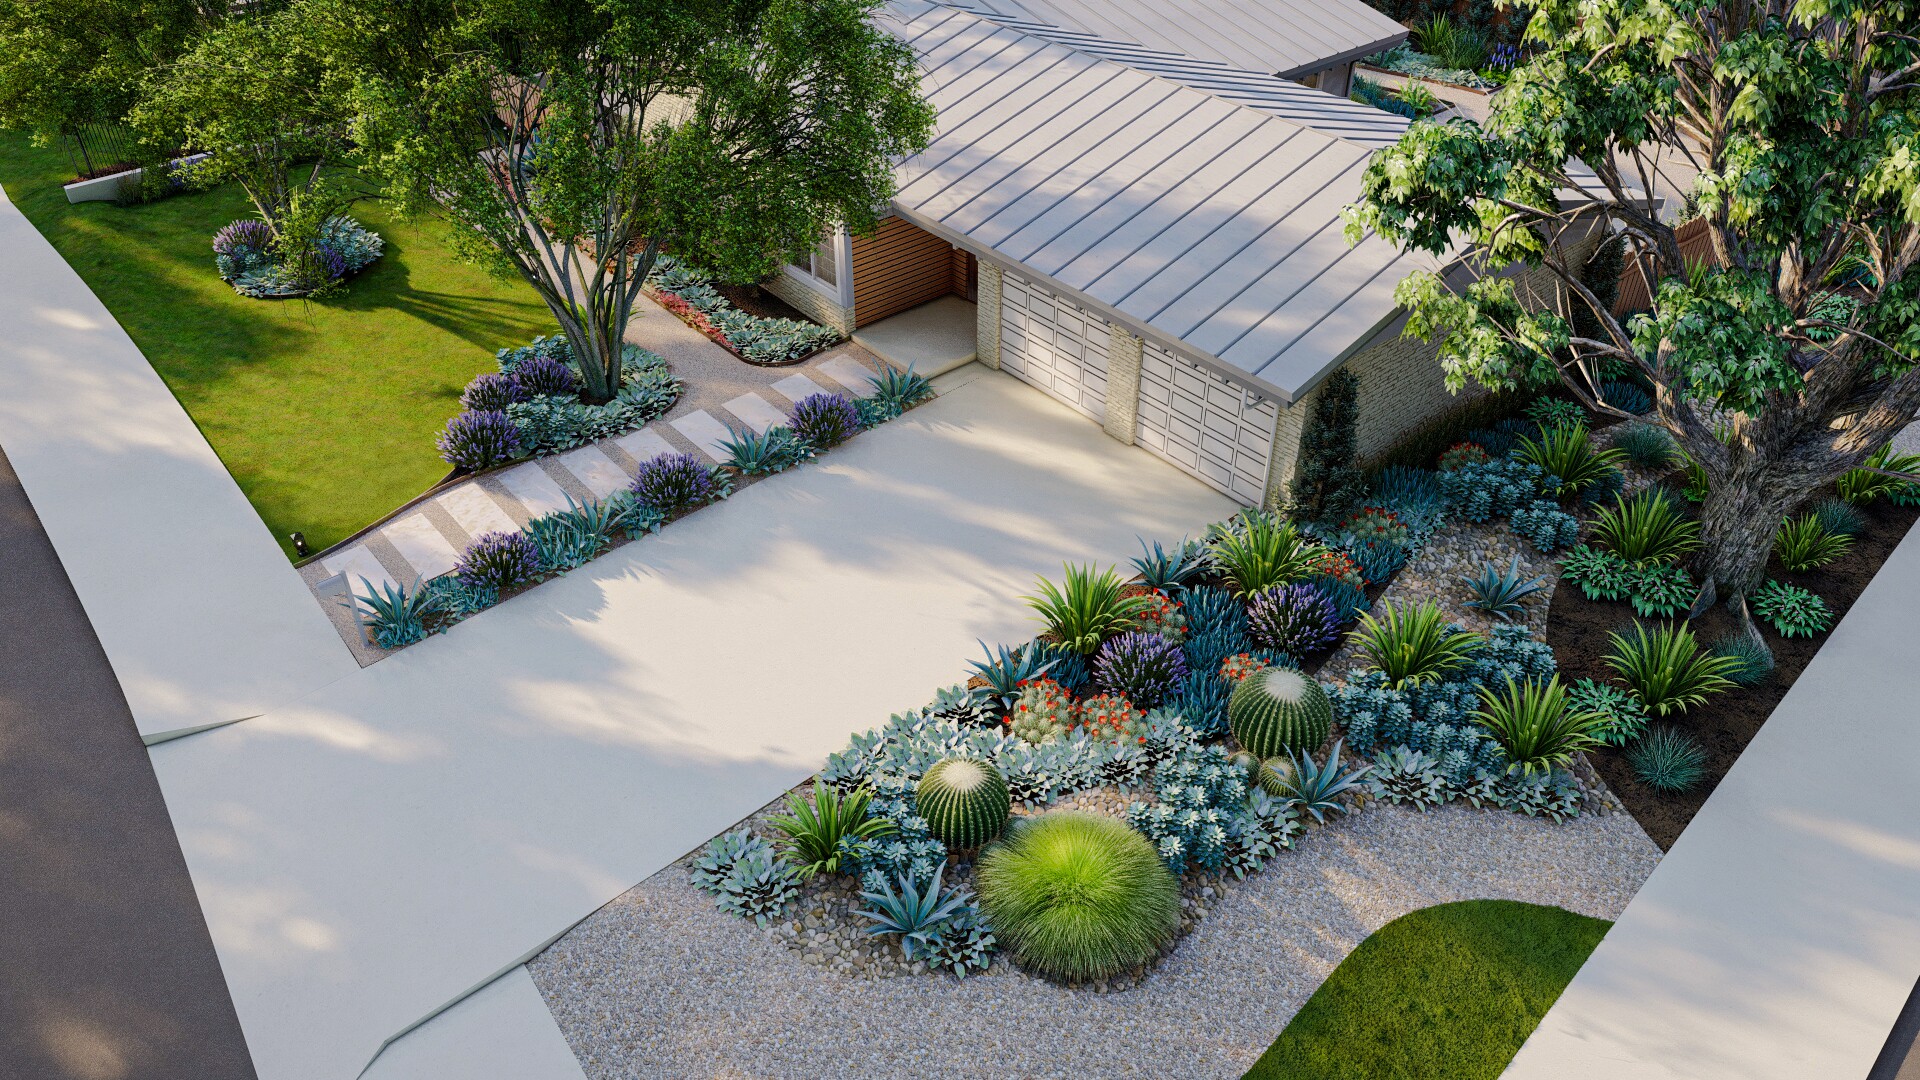 Contemporary desert-inspired landscaping with succulents, cacti, and gravel leading to a modern home's garage entrance